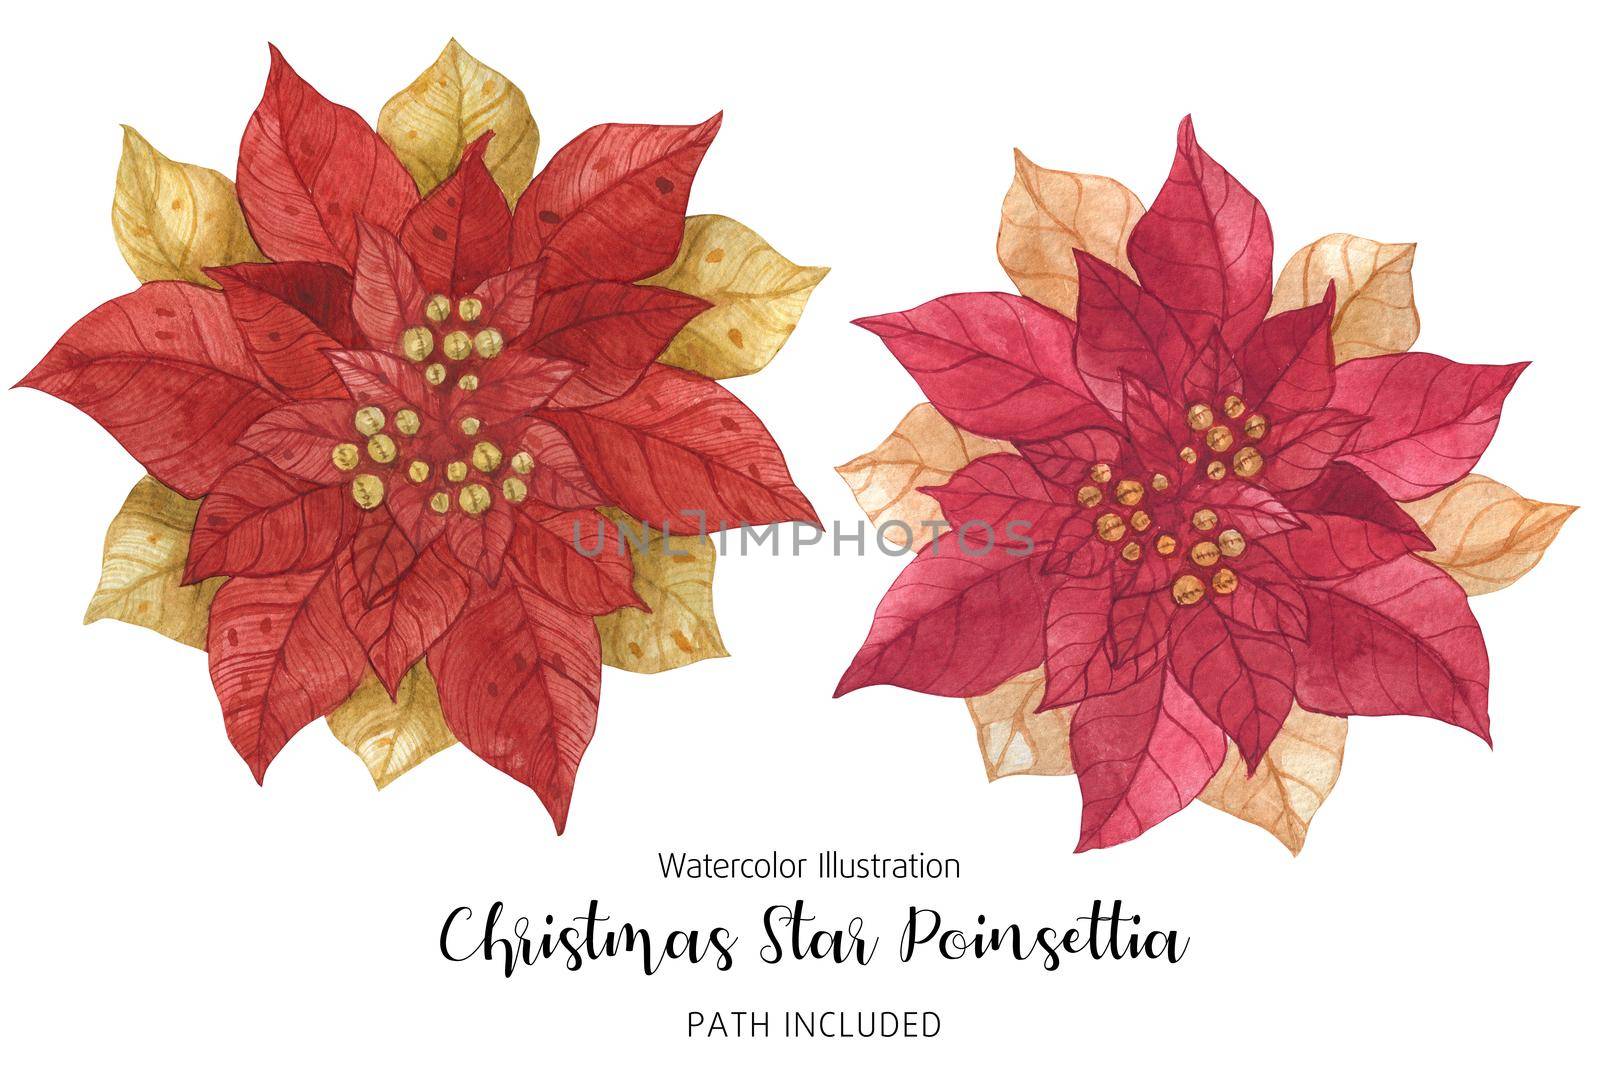 Poinsettia Red Gold Christmas Star by Xeniasnowstorm